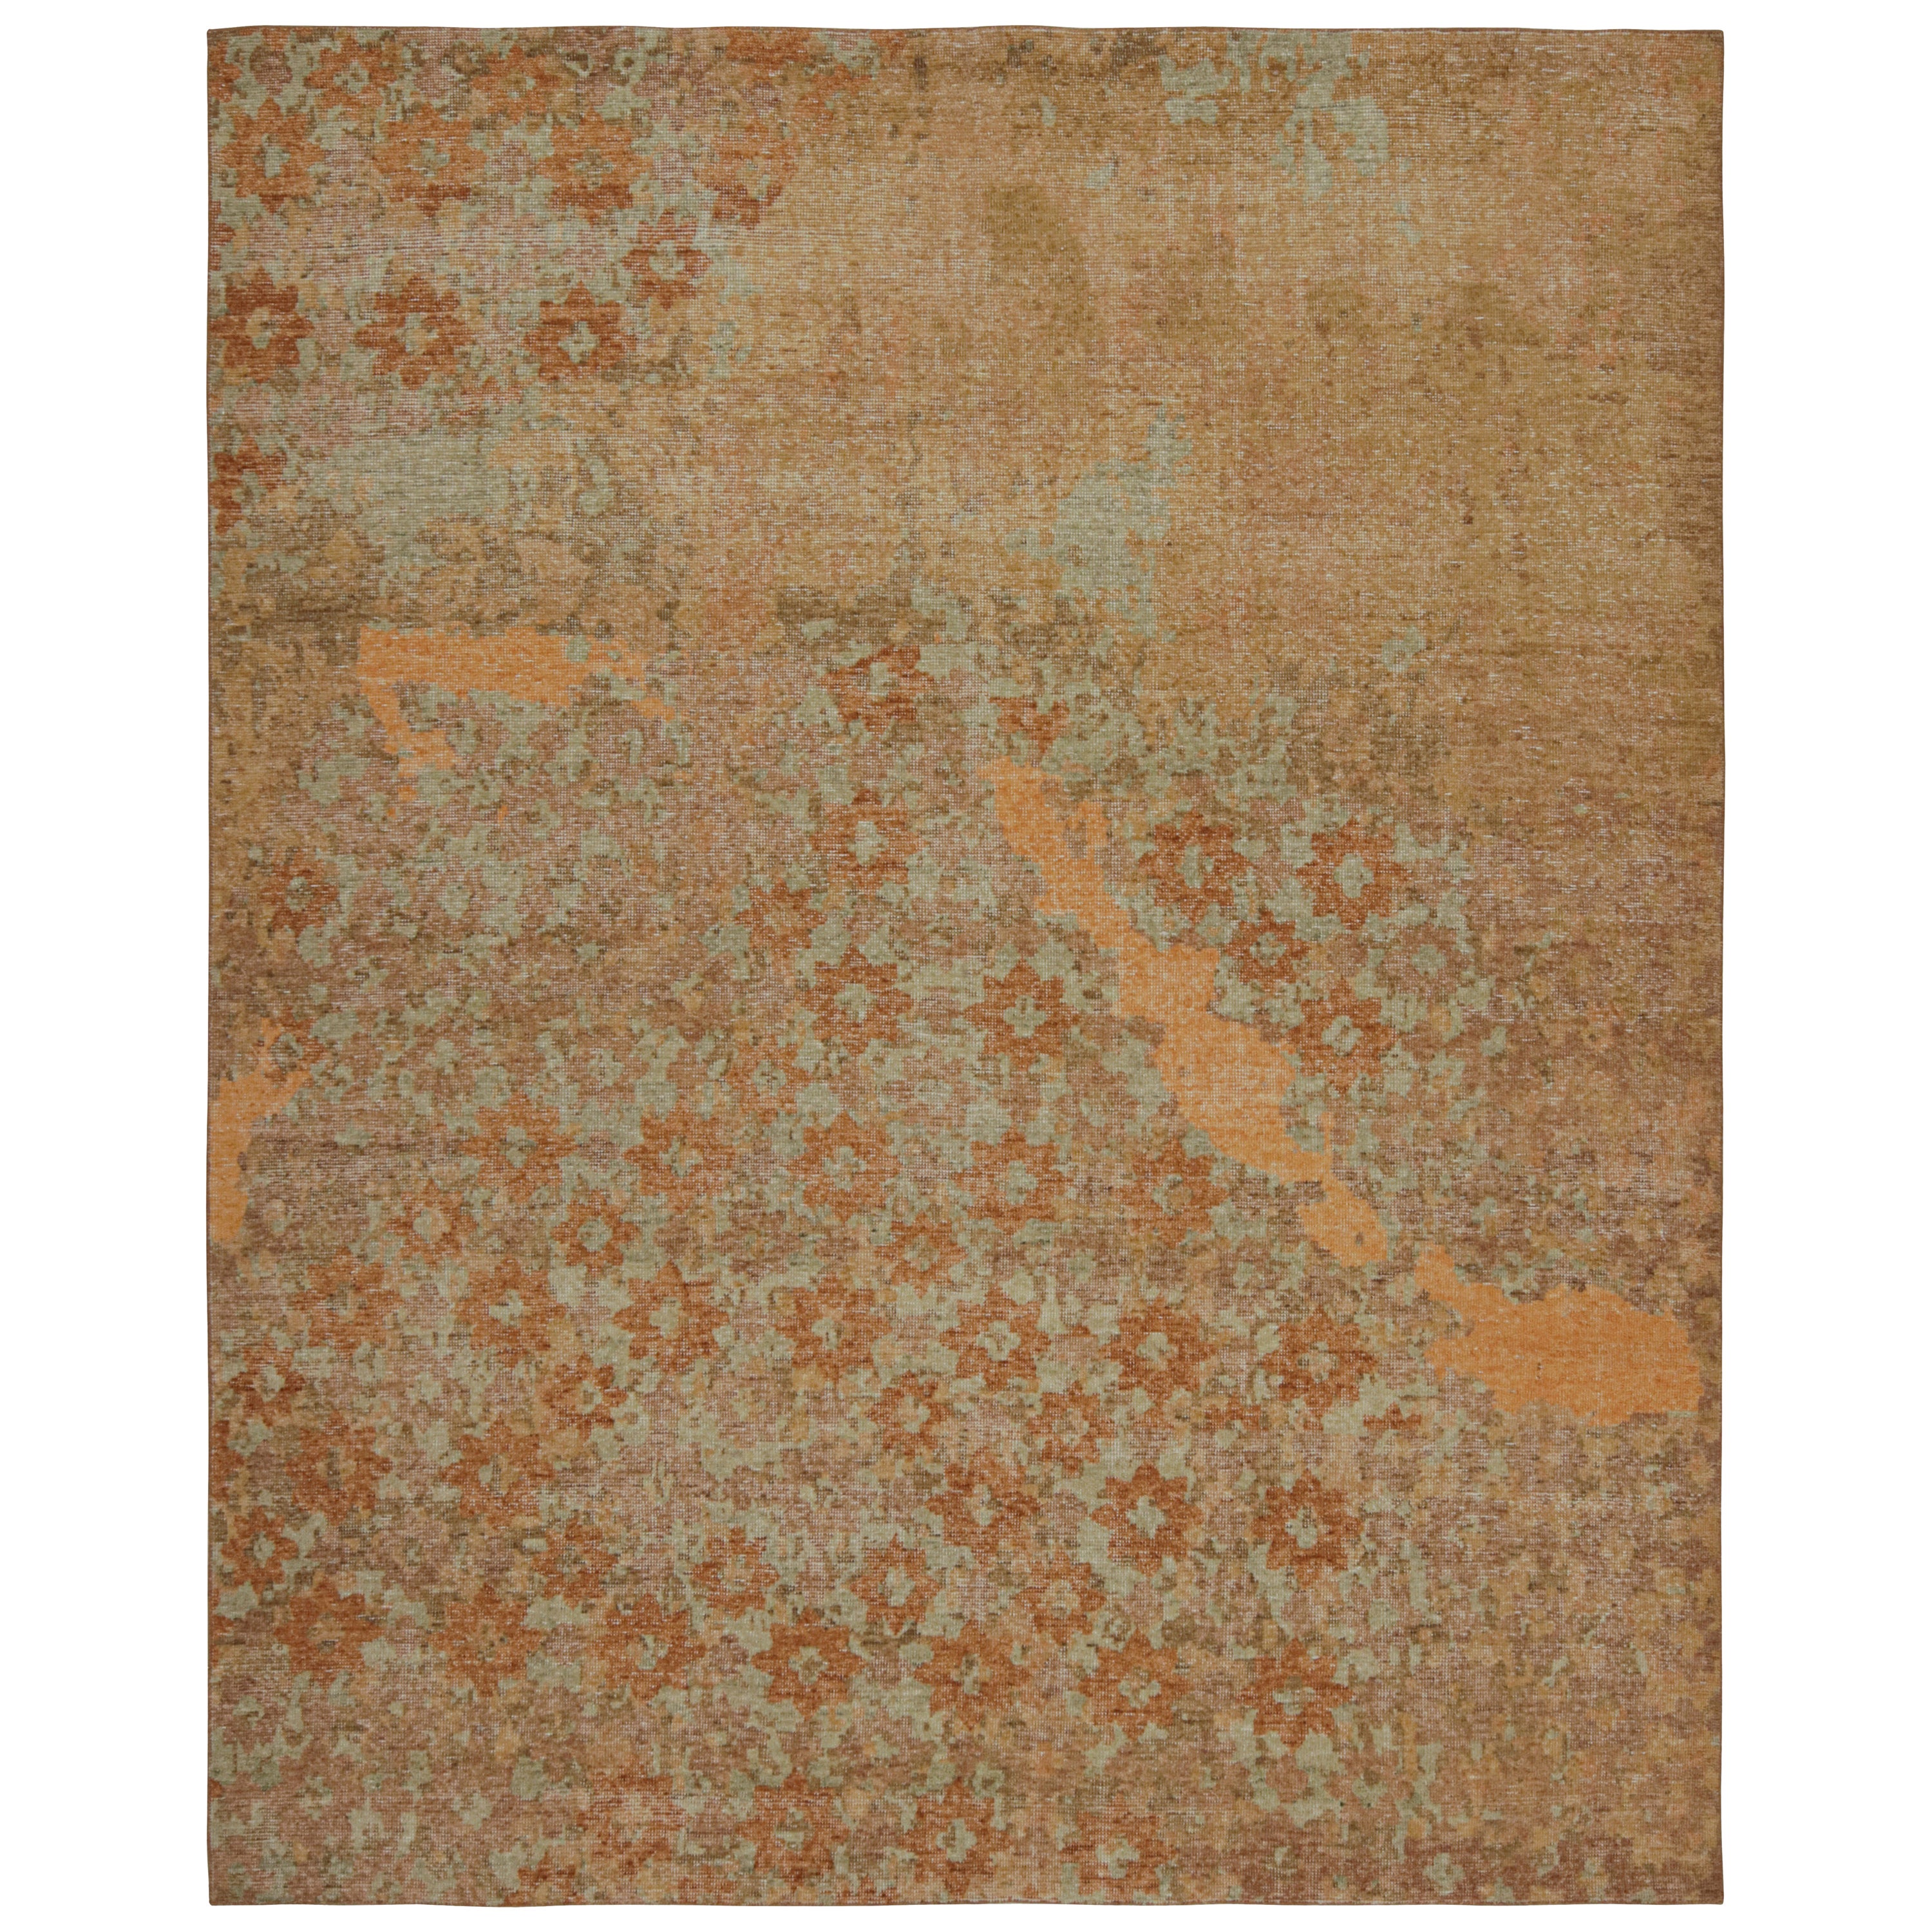 Rug & Kilim’s Modern Abstract Art Rug in Gold and Brown, with Floral Patterns